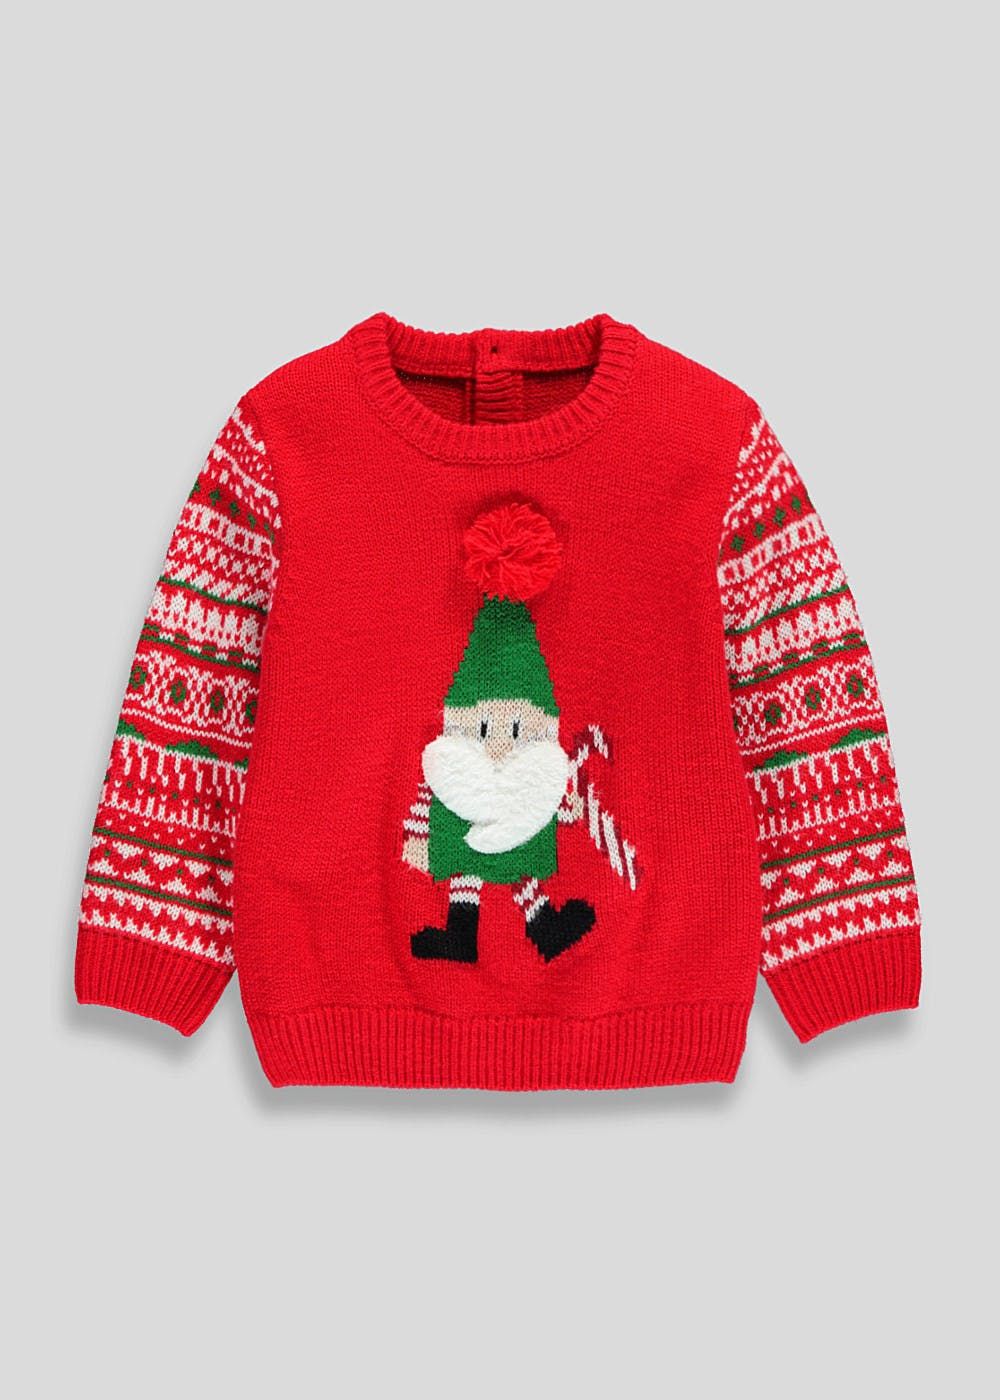 11 of the best Christmas jumpers for kids